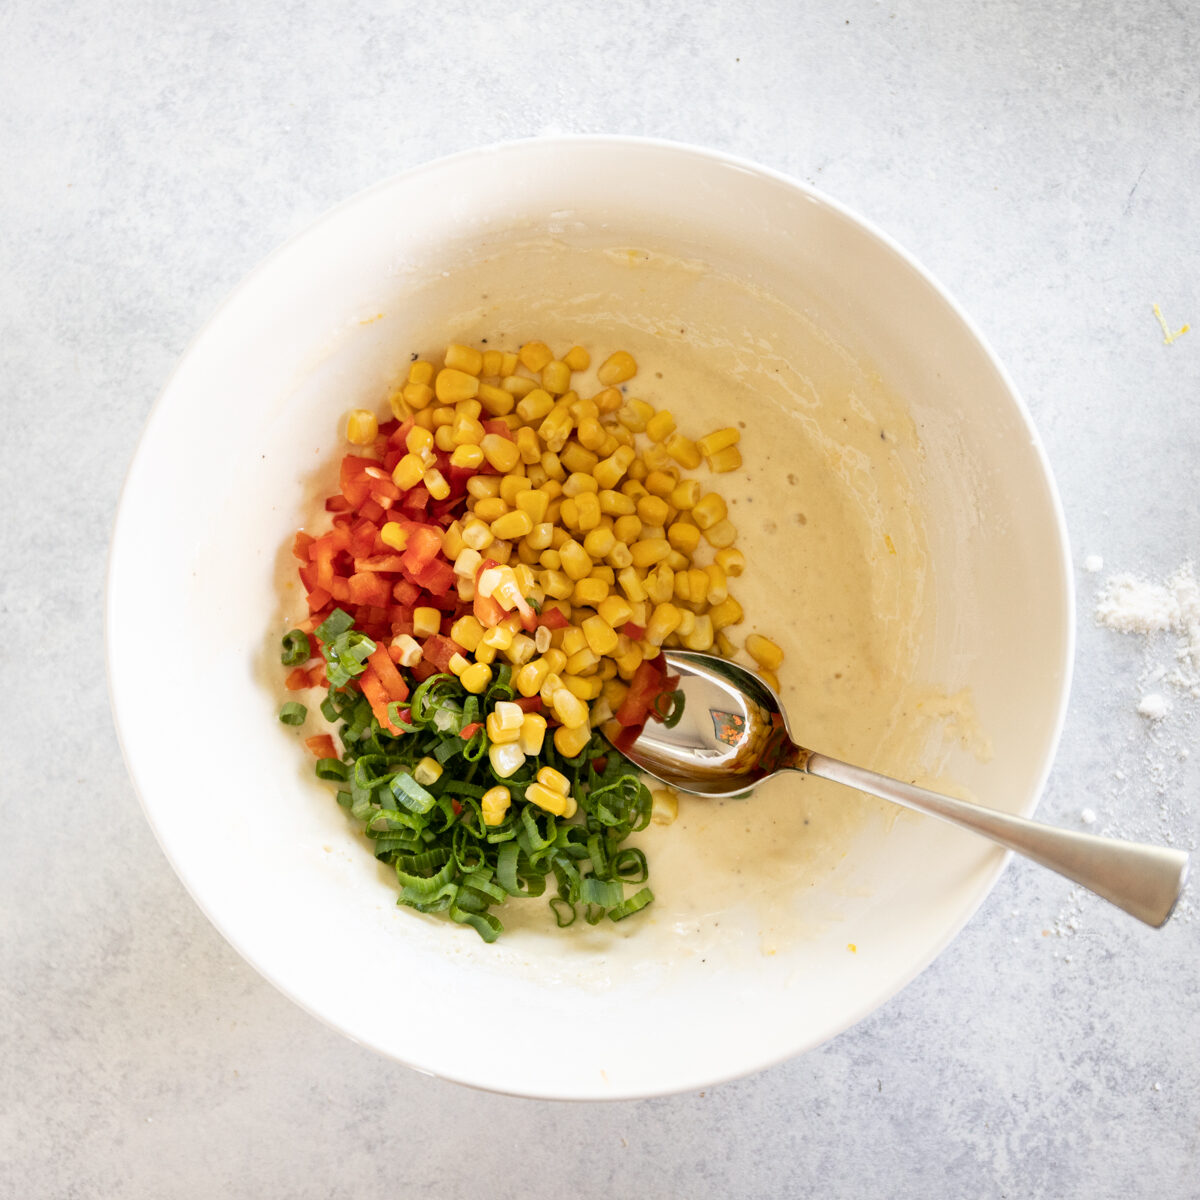 The cream colored batter has each ingredient poured in but not mixed yet. There is yellow corn kernels, diced red pepper and sliced scallions.